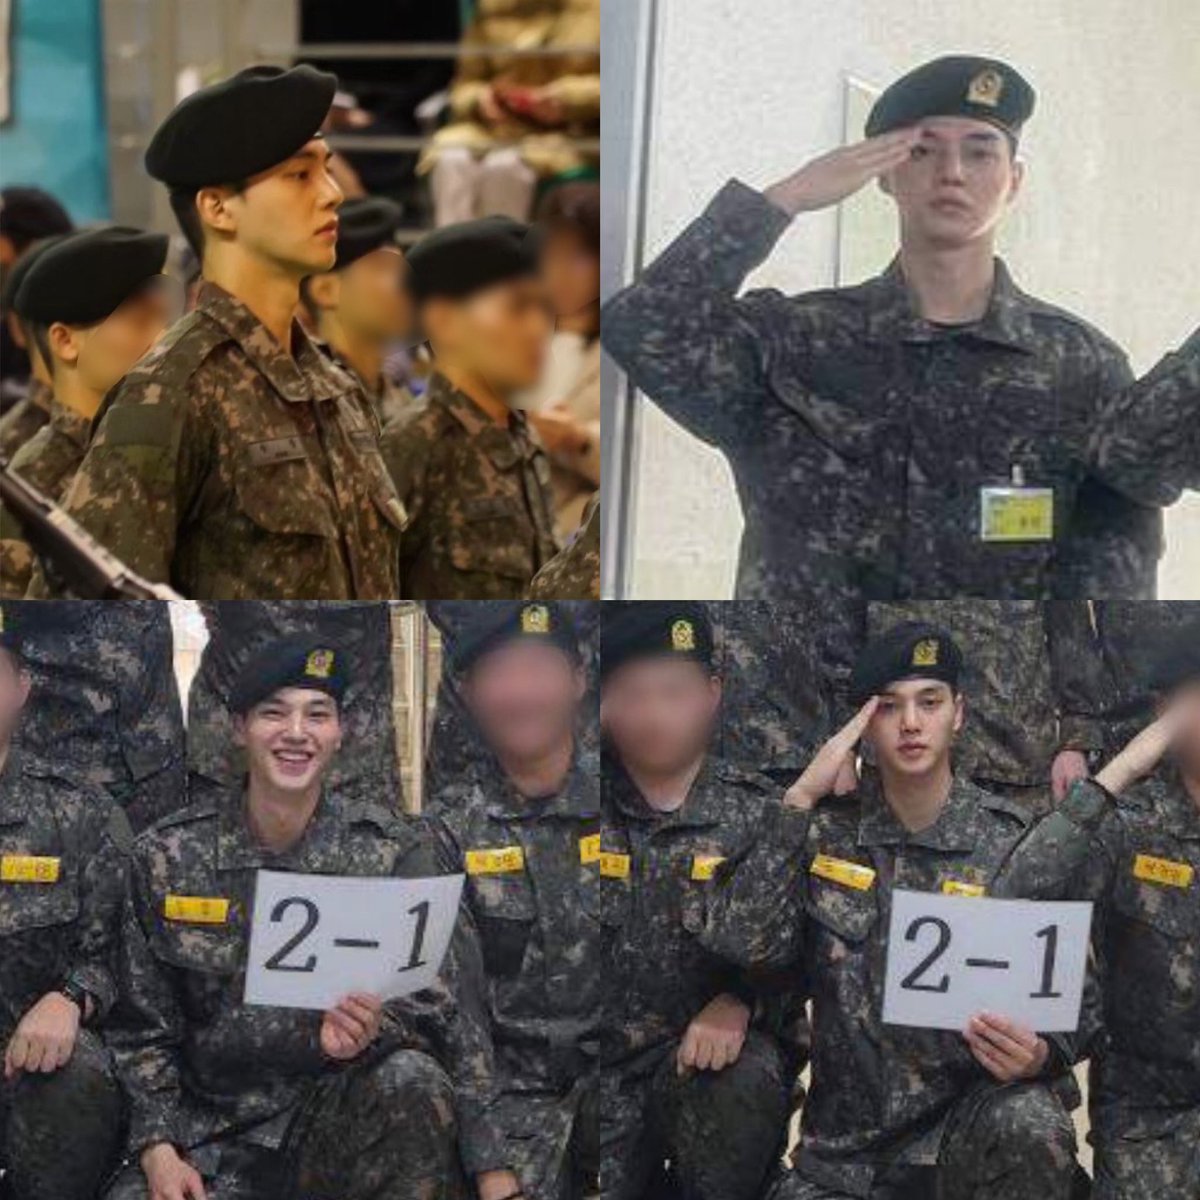 not all celebs looks this good in military uniform but #SongKang wow his face card indeed superior😍😍